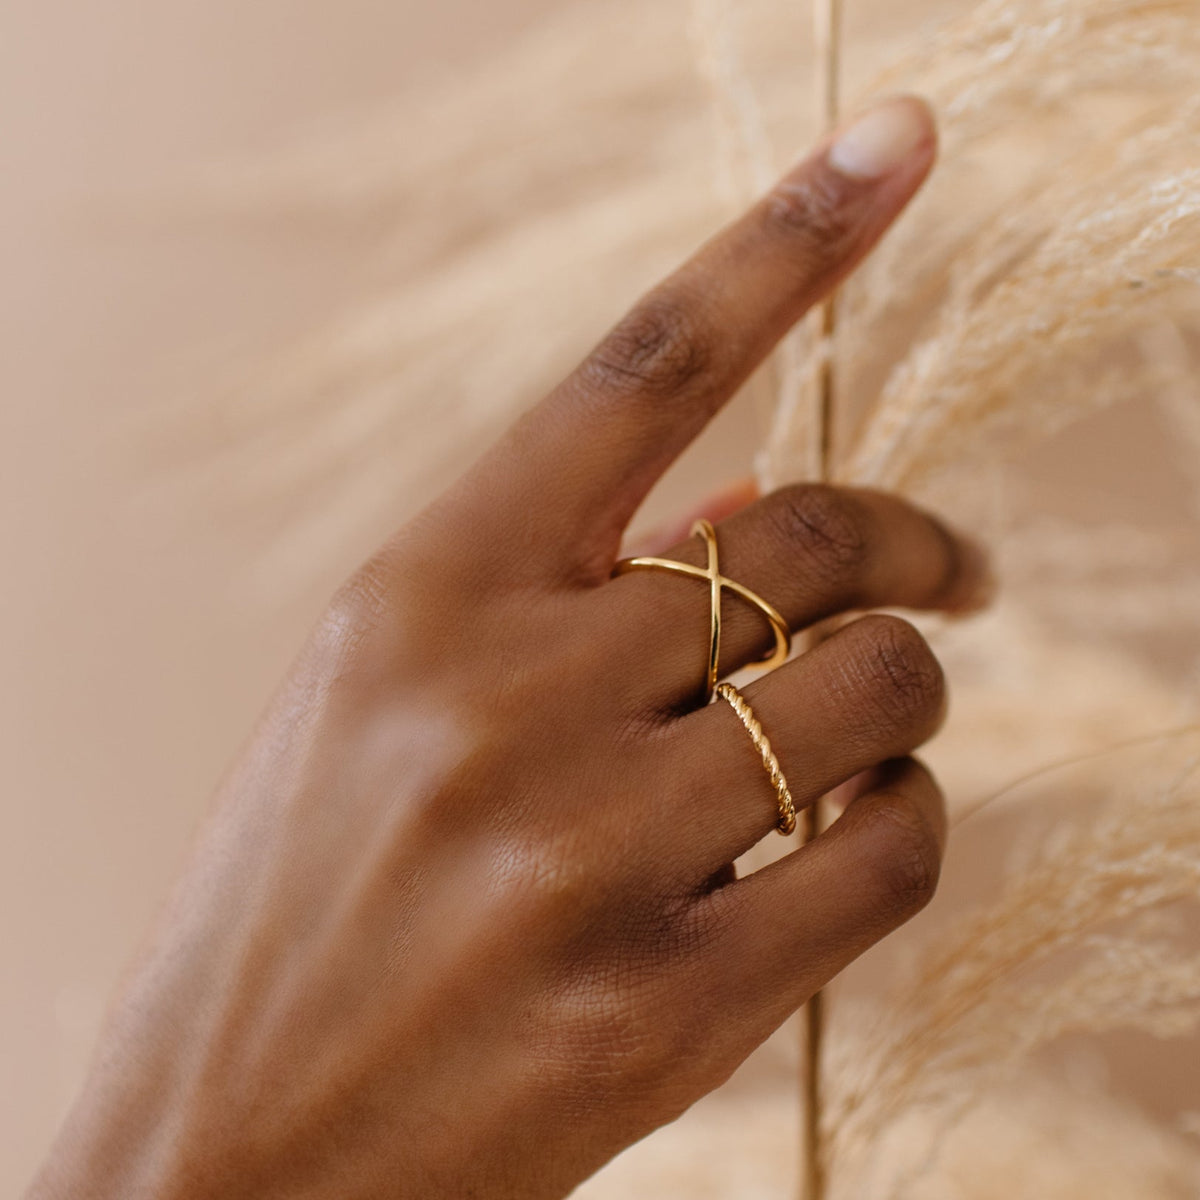 POISE CROSSED BAR RING - GOLD - SO PRETTY CARA COTTER